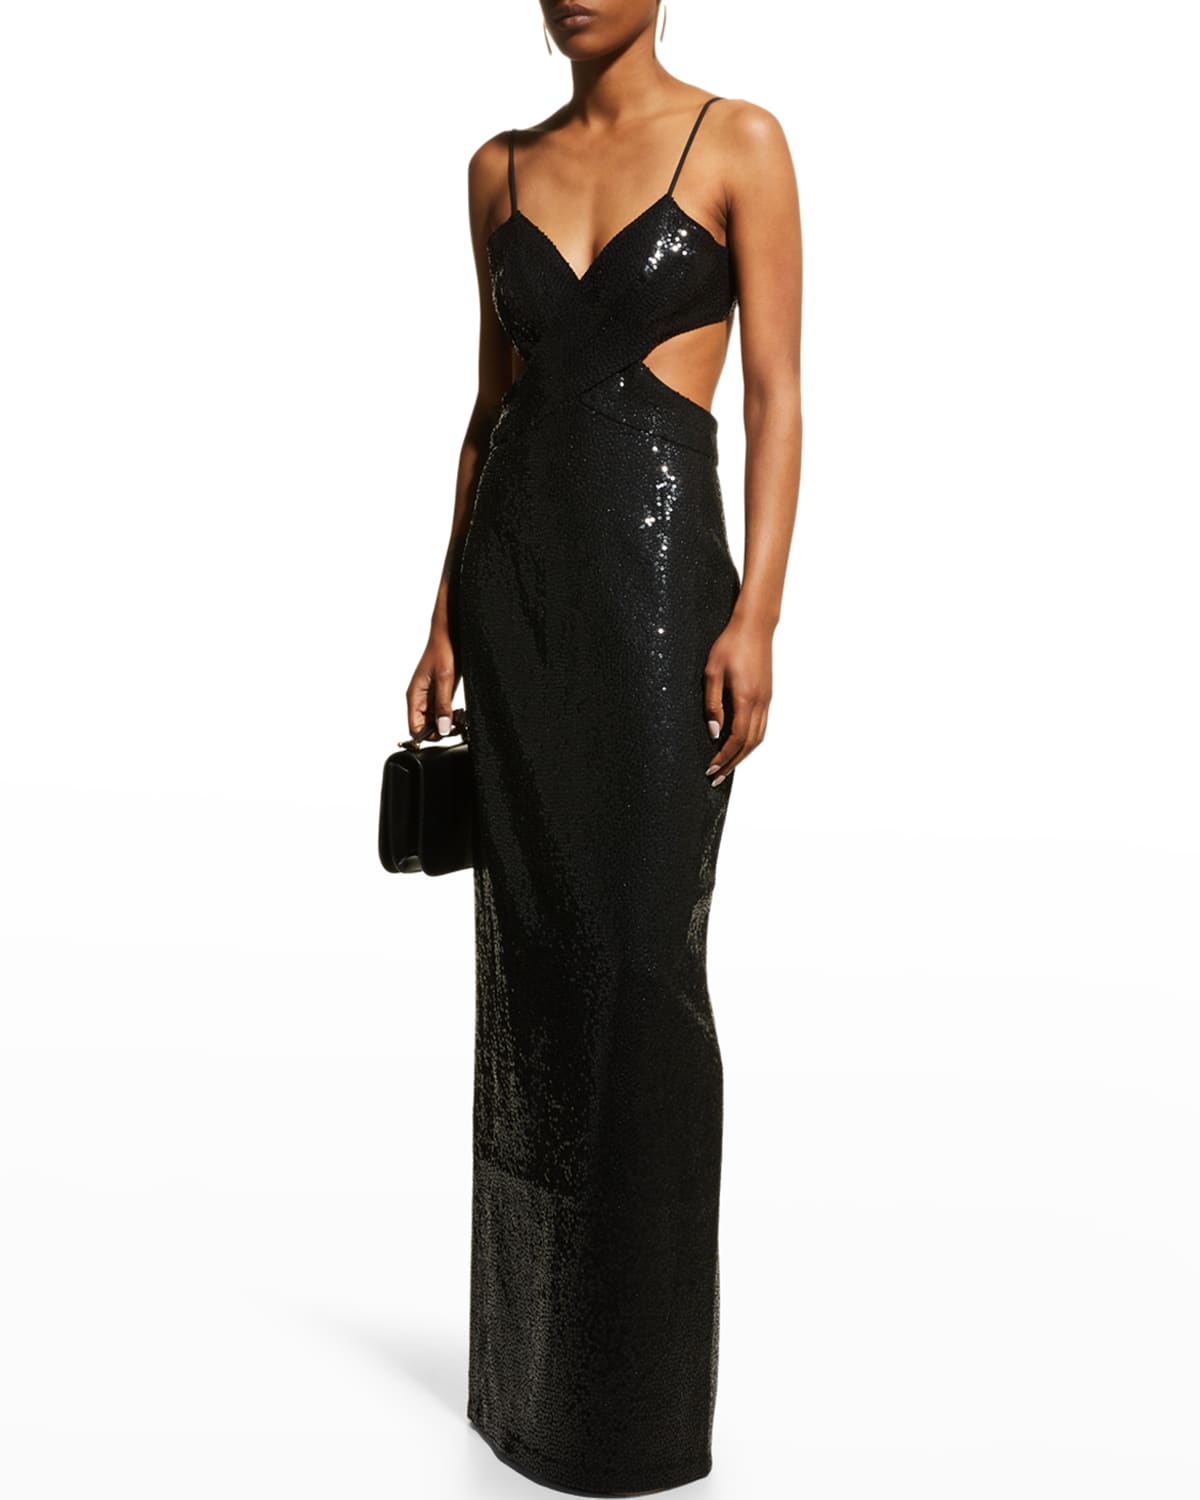 MICHAEL KORS SEQUIN-EMBELLISHED CROSSOVER CUTOUT COLUMN GOWN